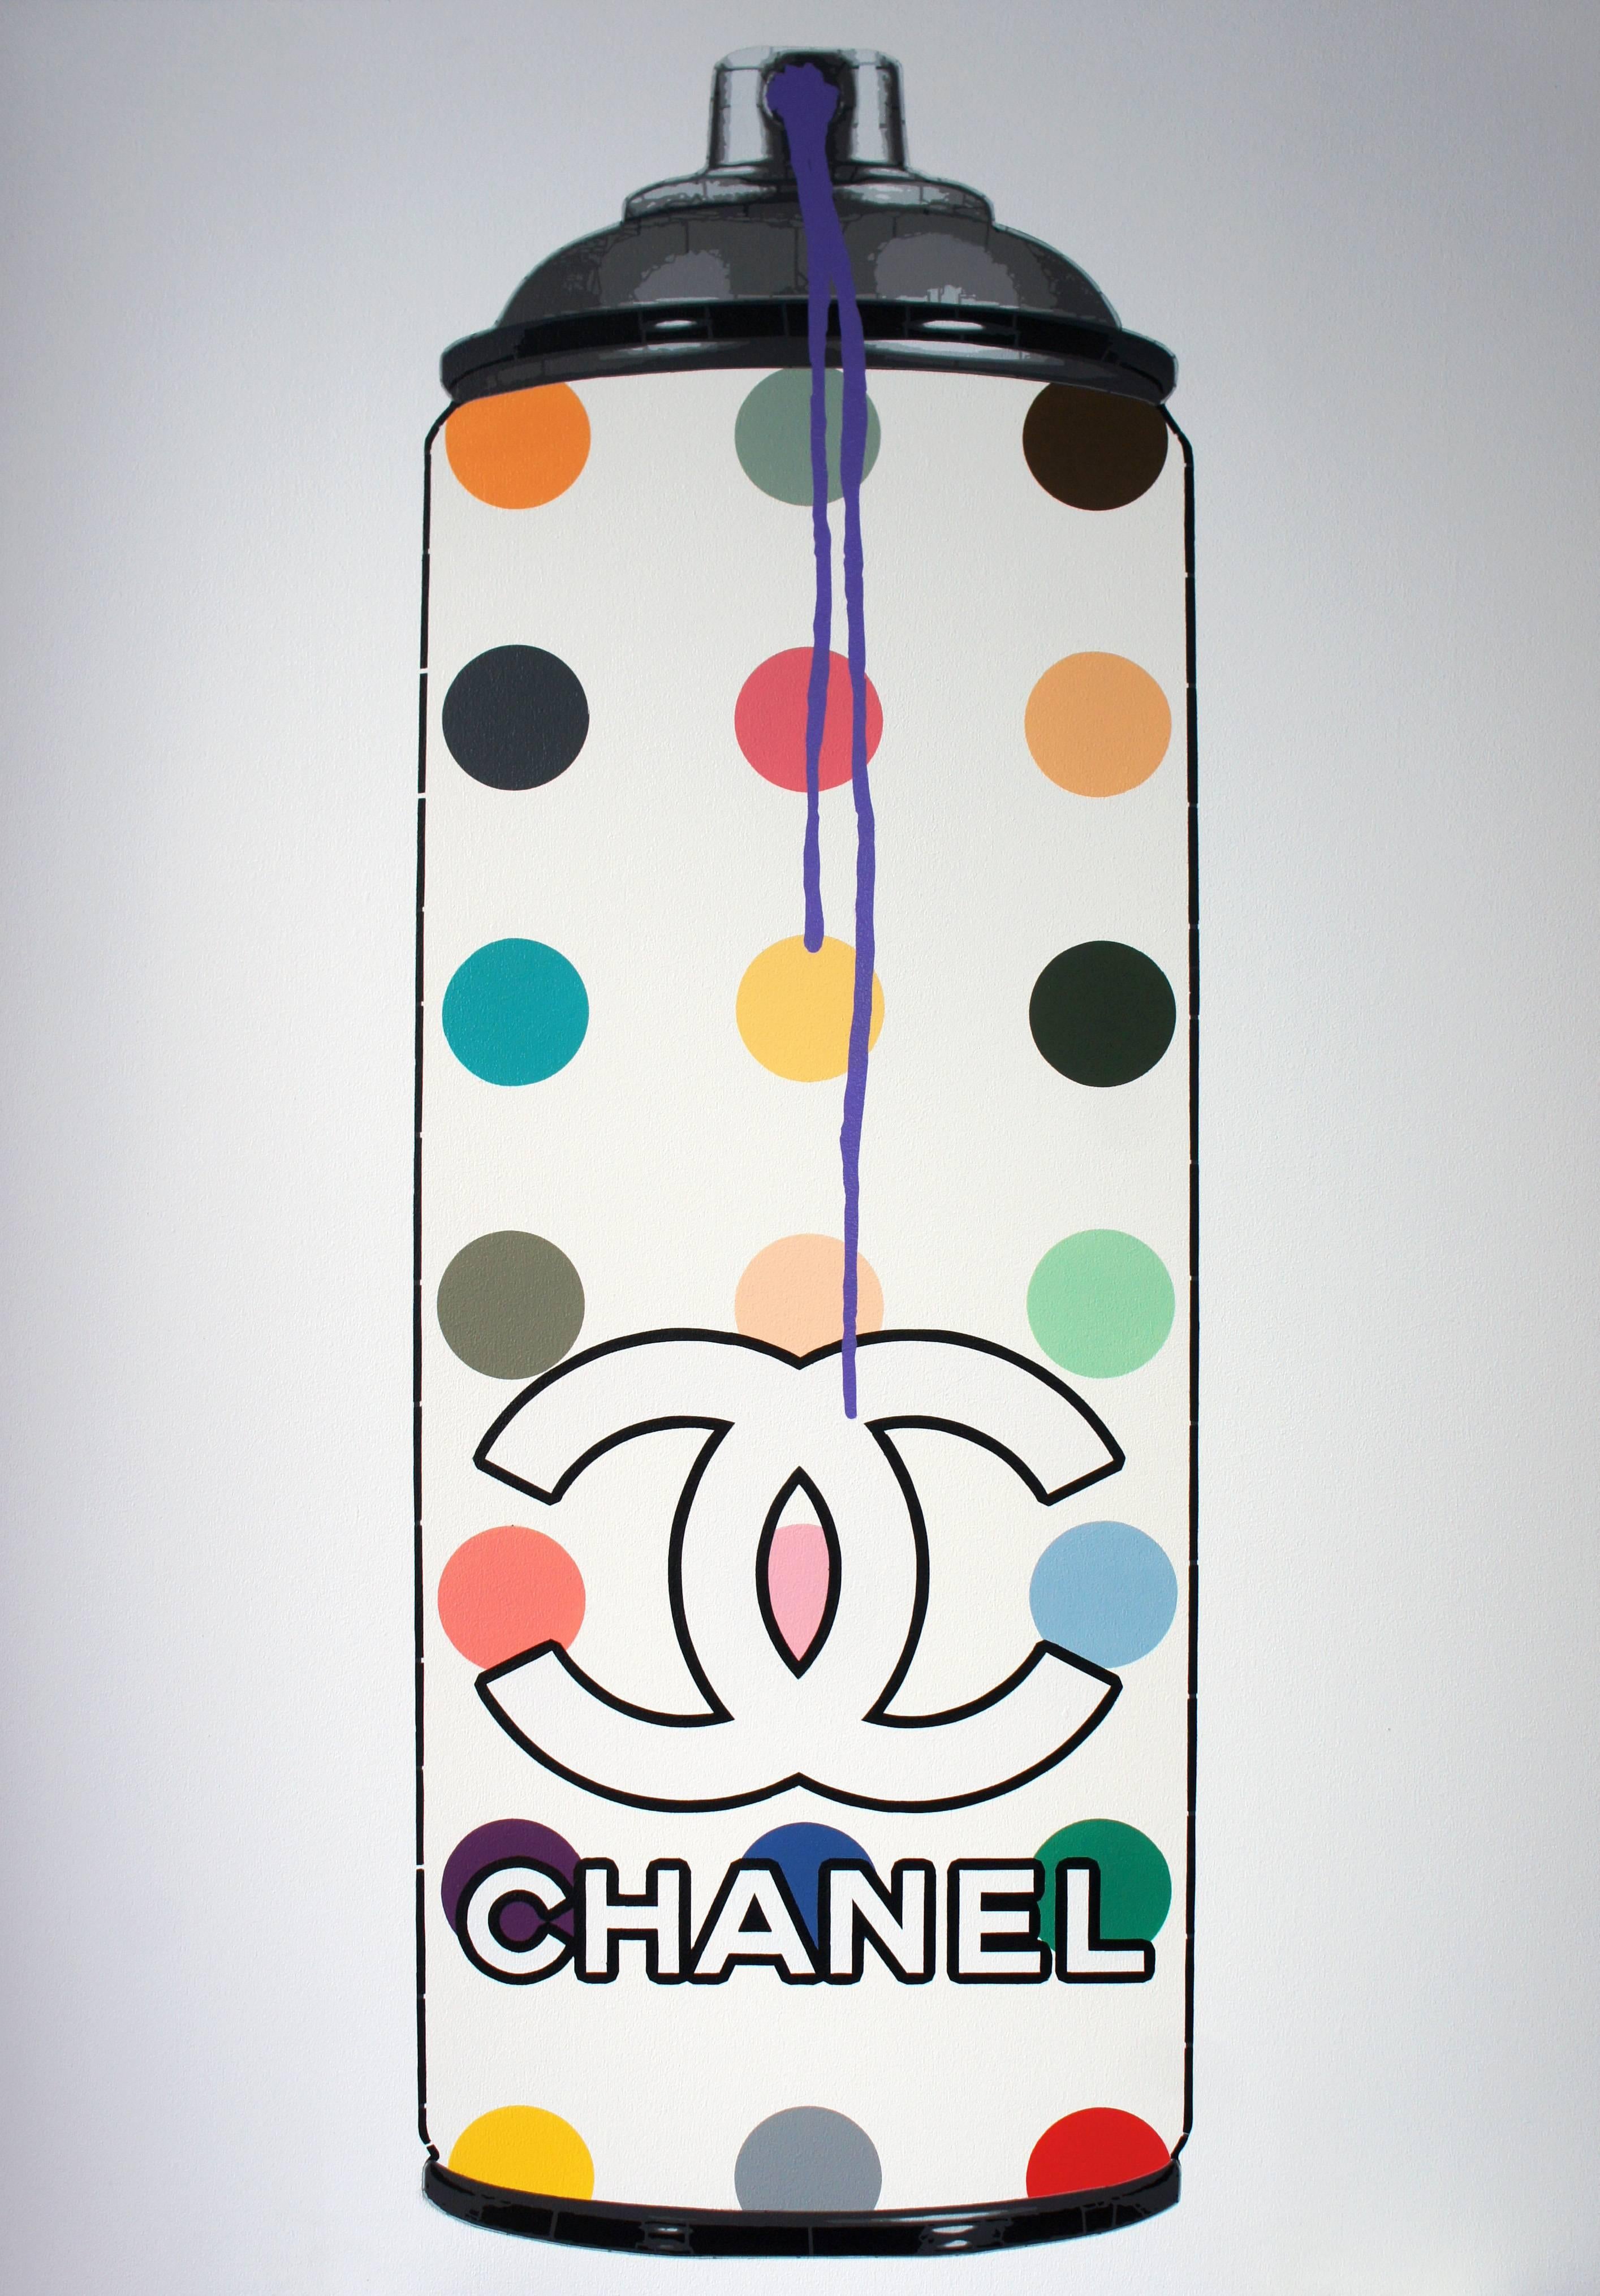 Chanel Spot - Painting by Campbell la Pun